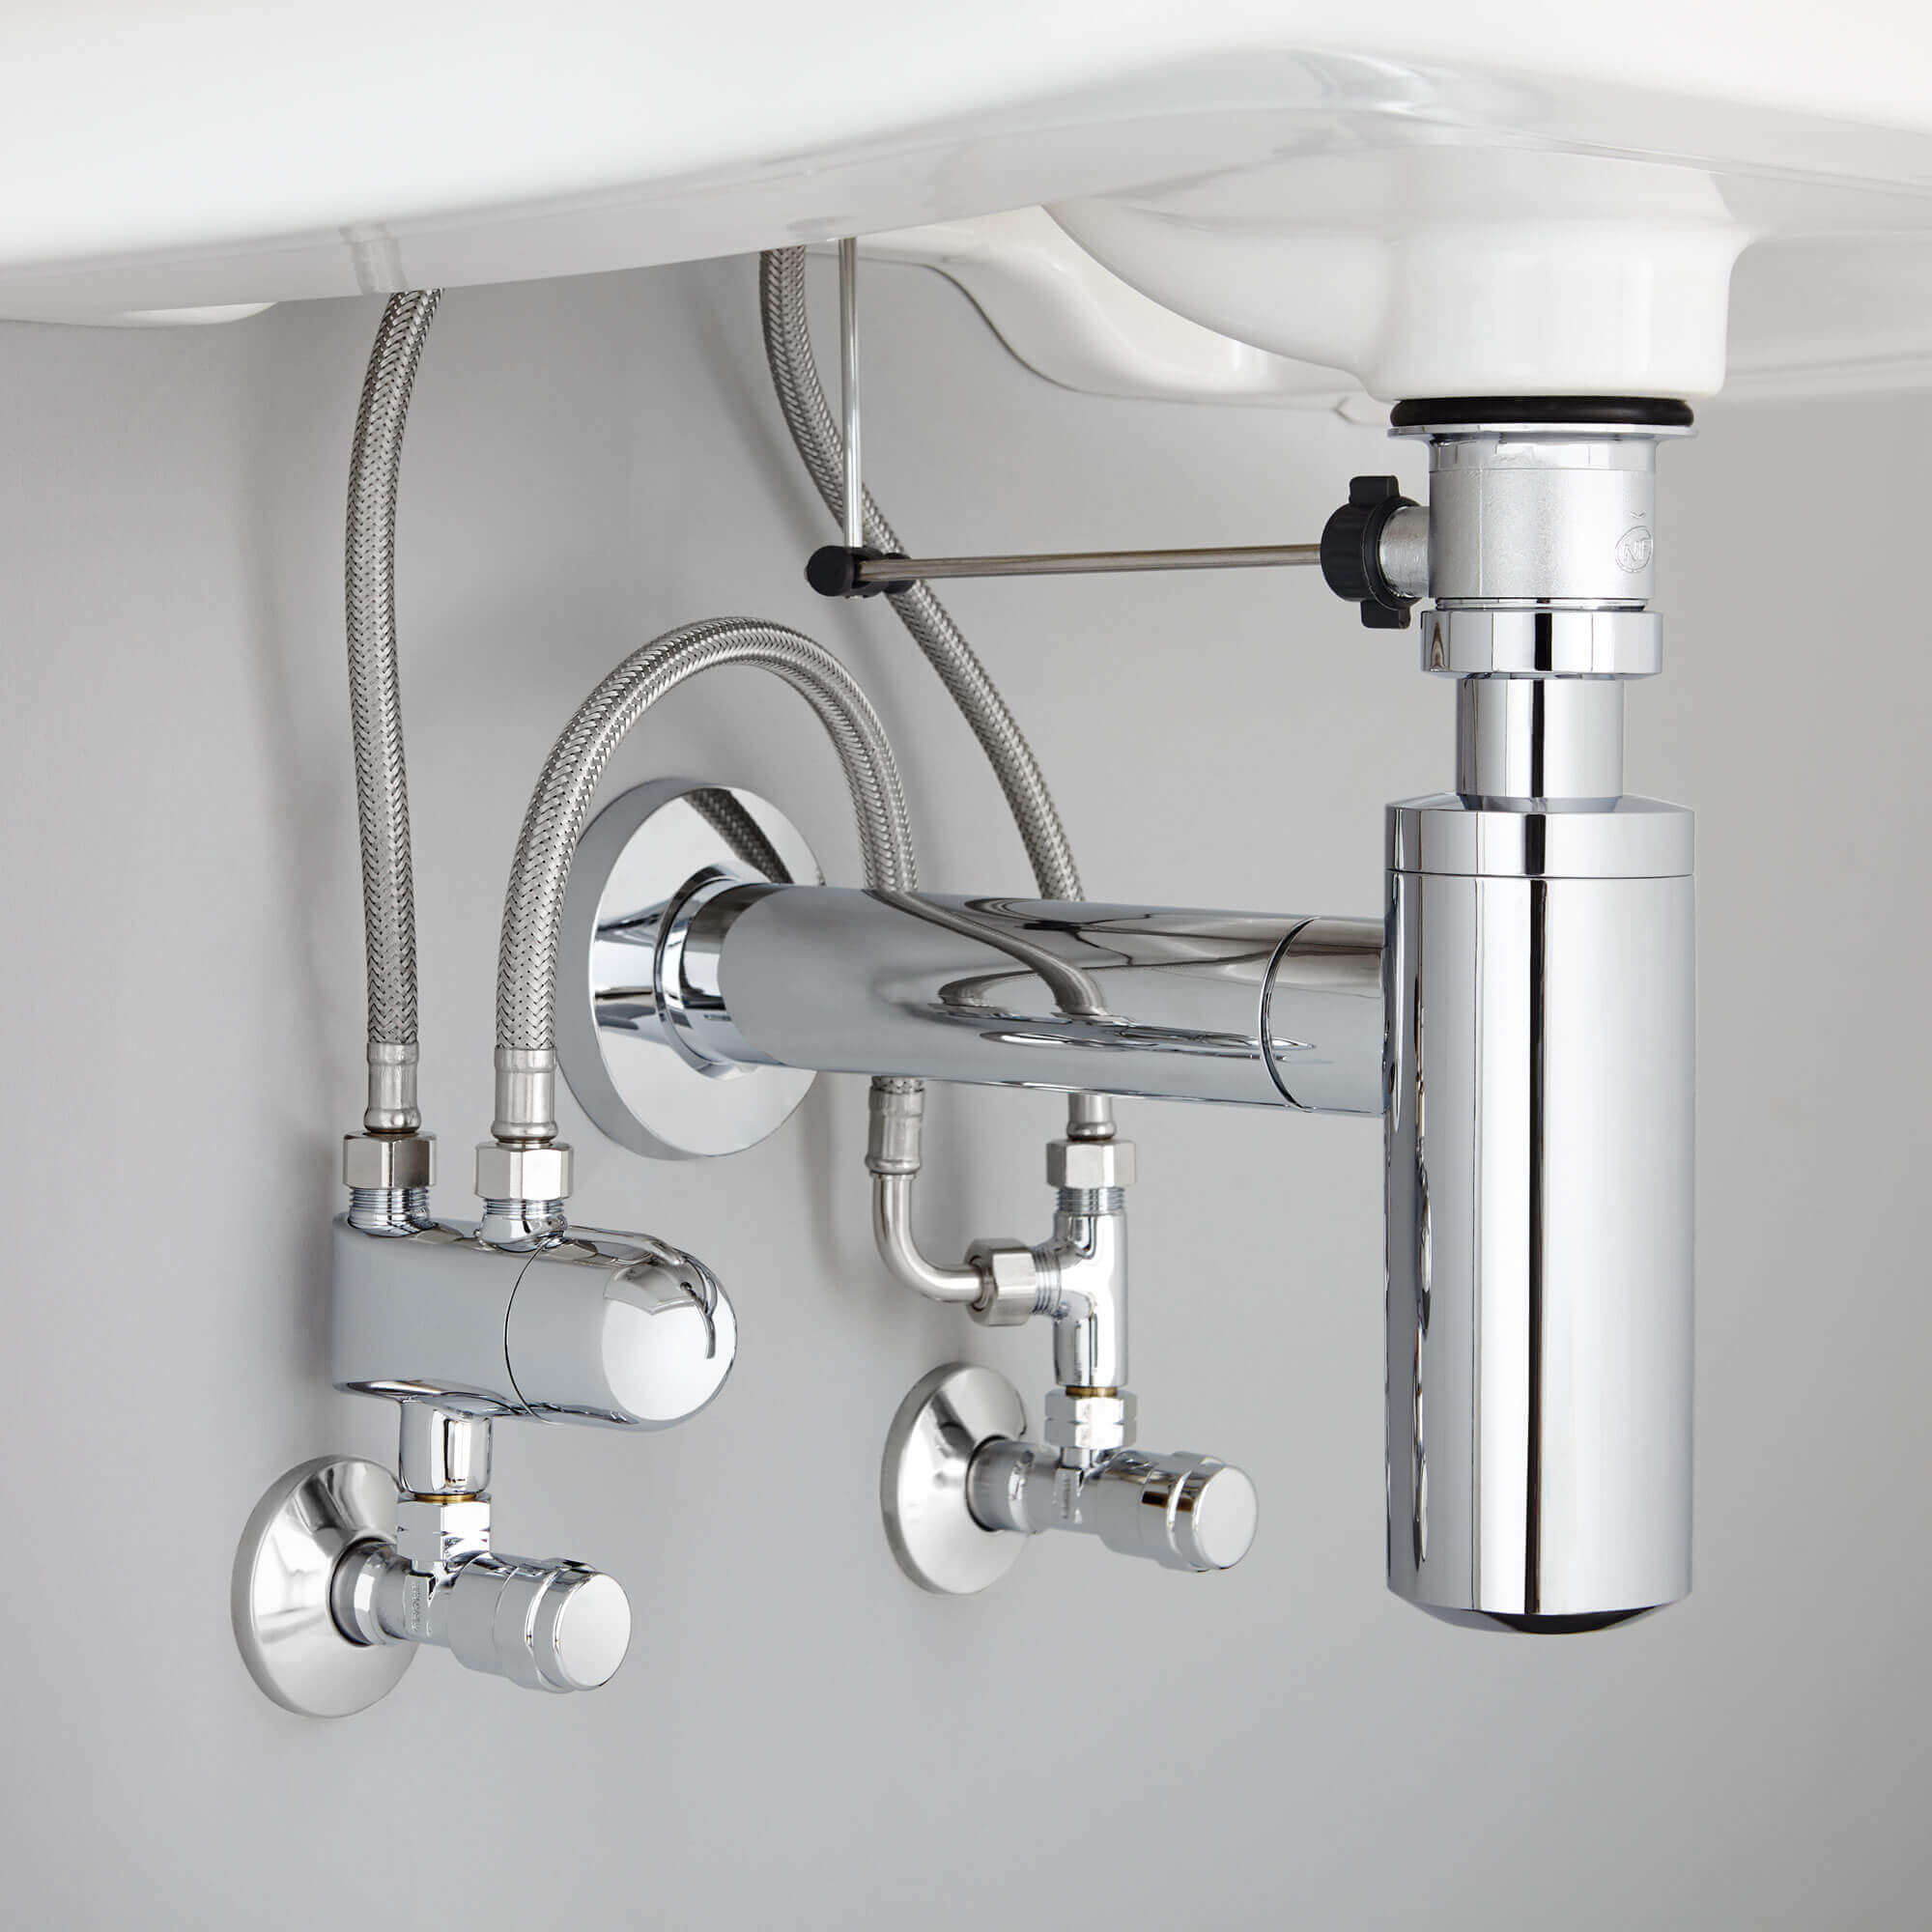 GROHE Grohtherm Micro Thermostat - under the sink view